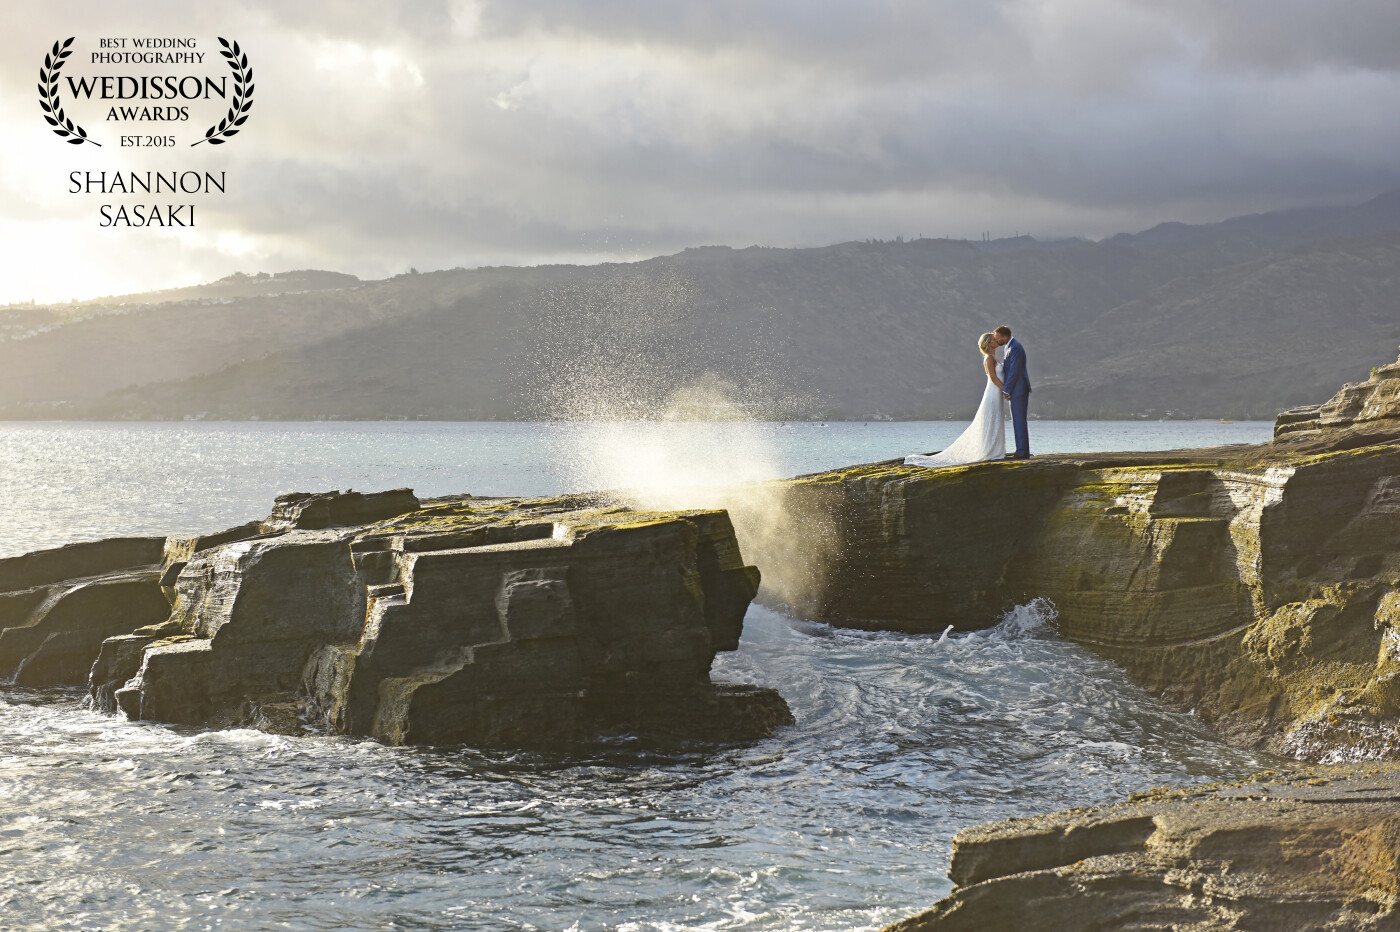 This couple promised their love to one another on a stunning cliffside on Oahu.  Kissing in front of a golden sunset with the waves crashing right next to her, it was this bride's dream come true.  